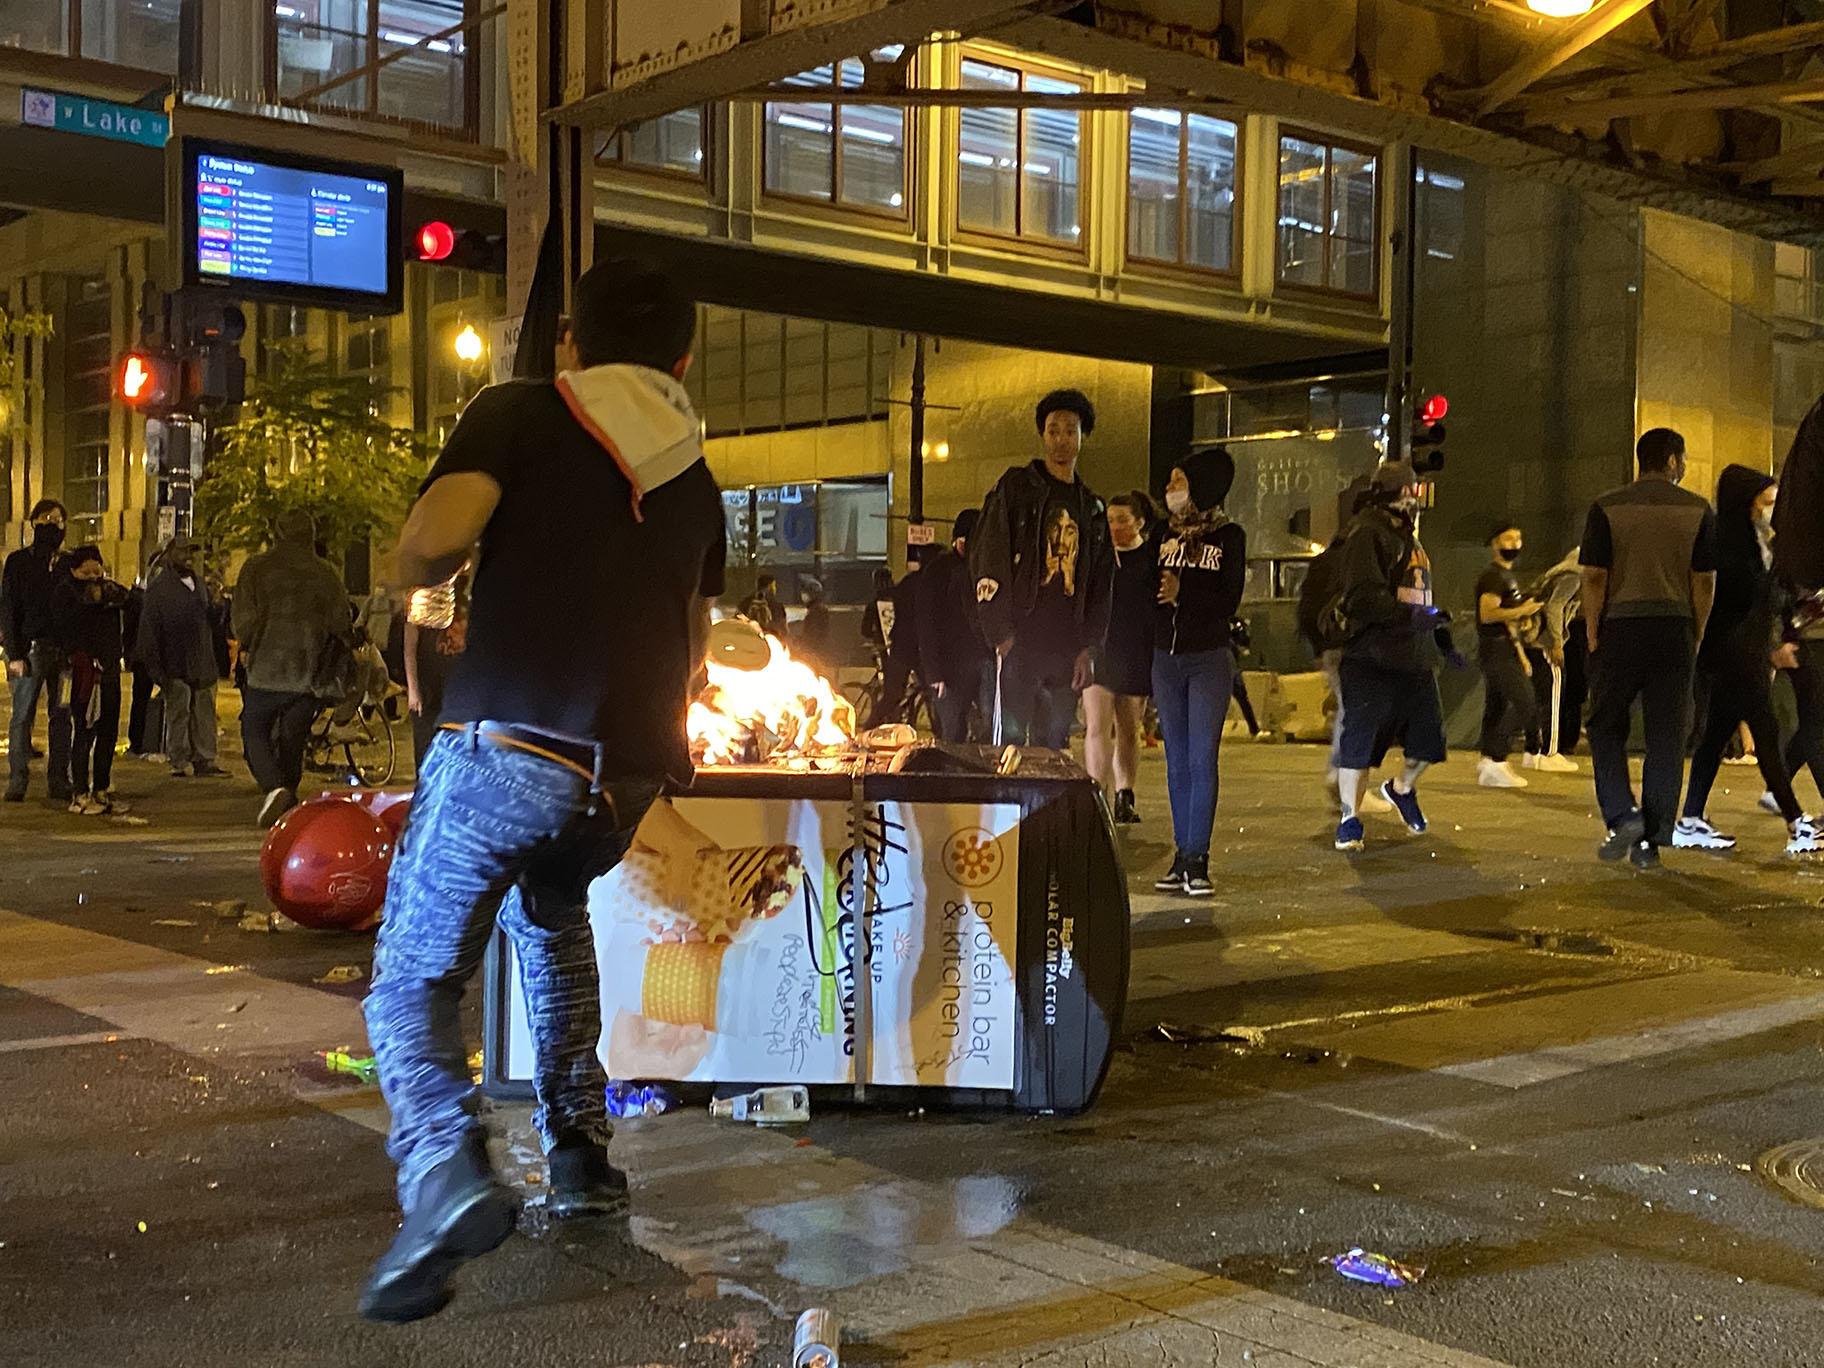 A chaotic scene in Chicago on Saturday, May 30, 2020. (Hugo Balta / WTTW News)